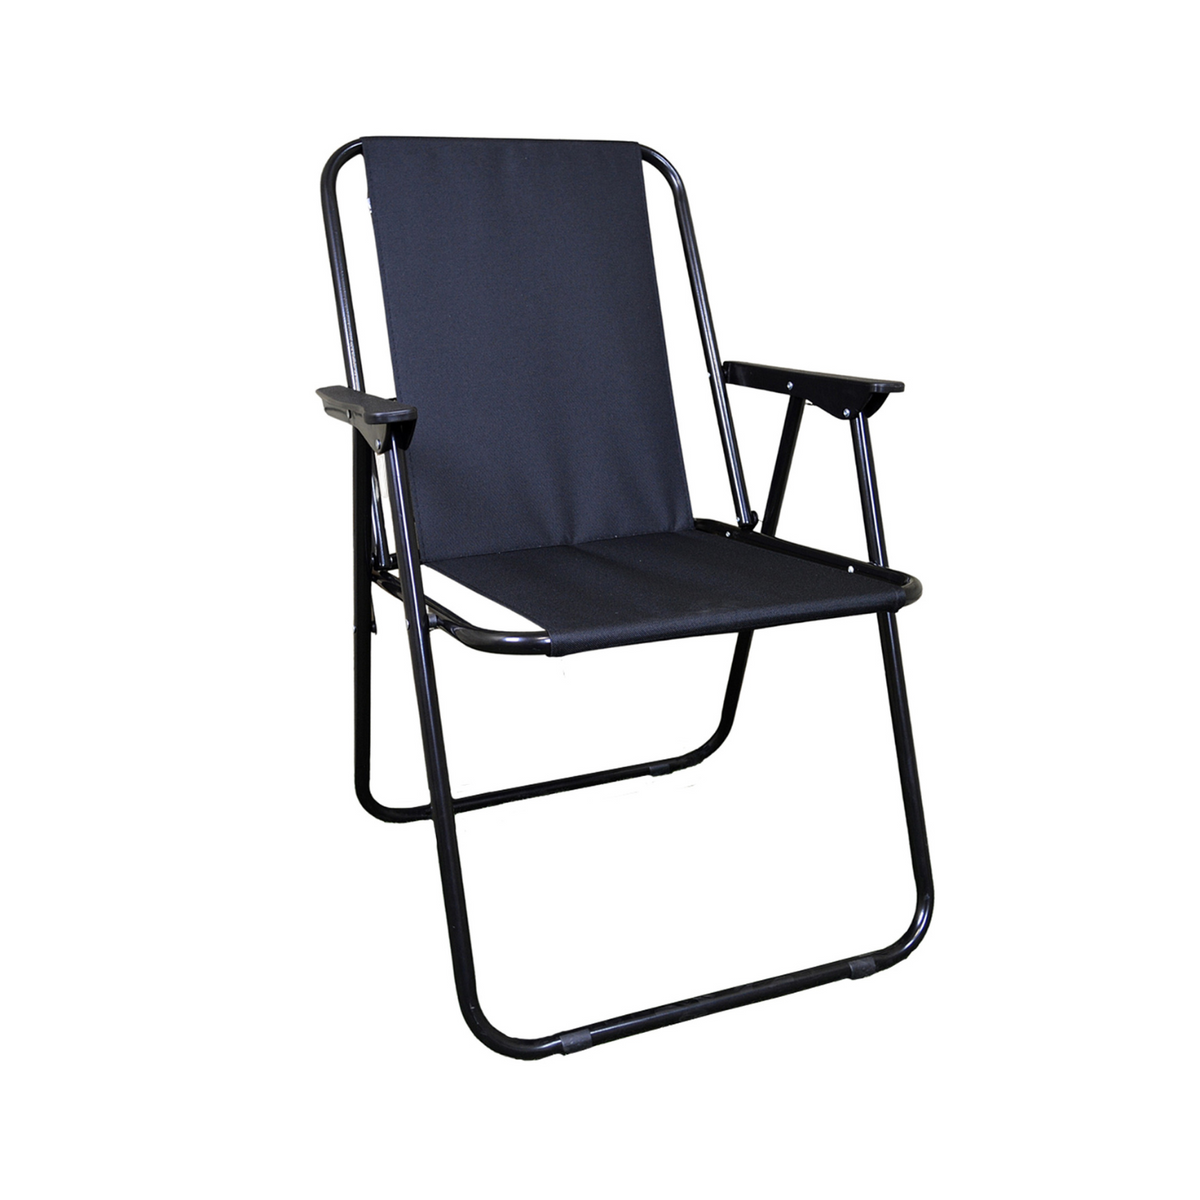 Black Folding Canvas Camping / Festival / Outdoor Chair with Plastic Arm Rests